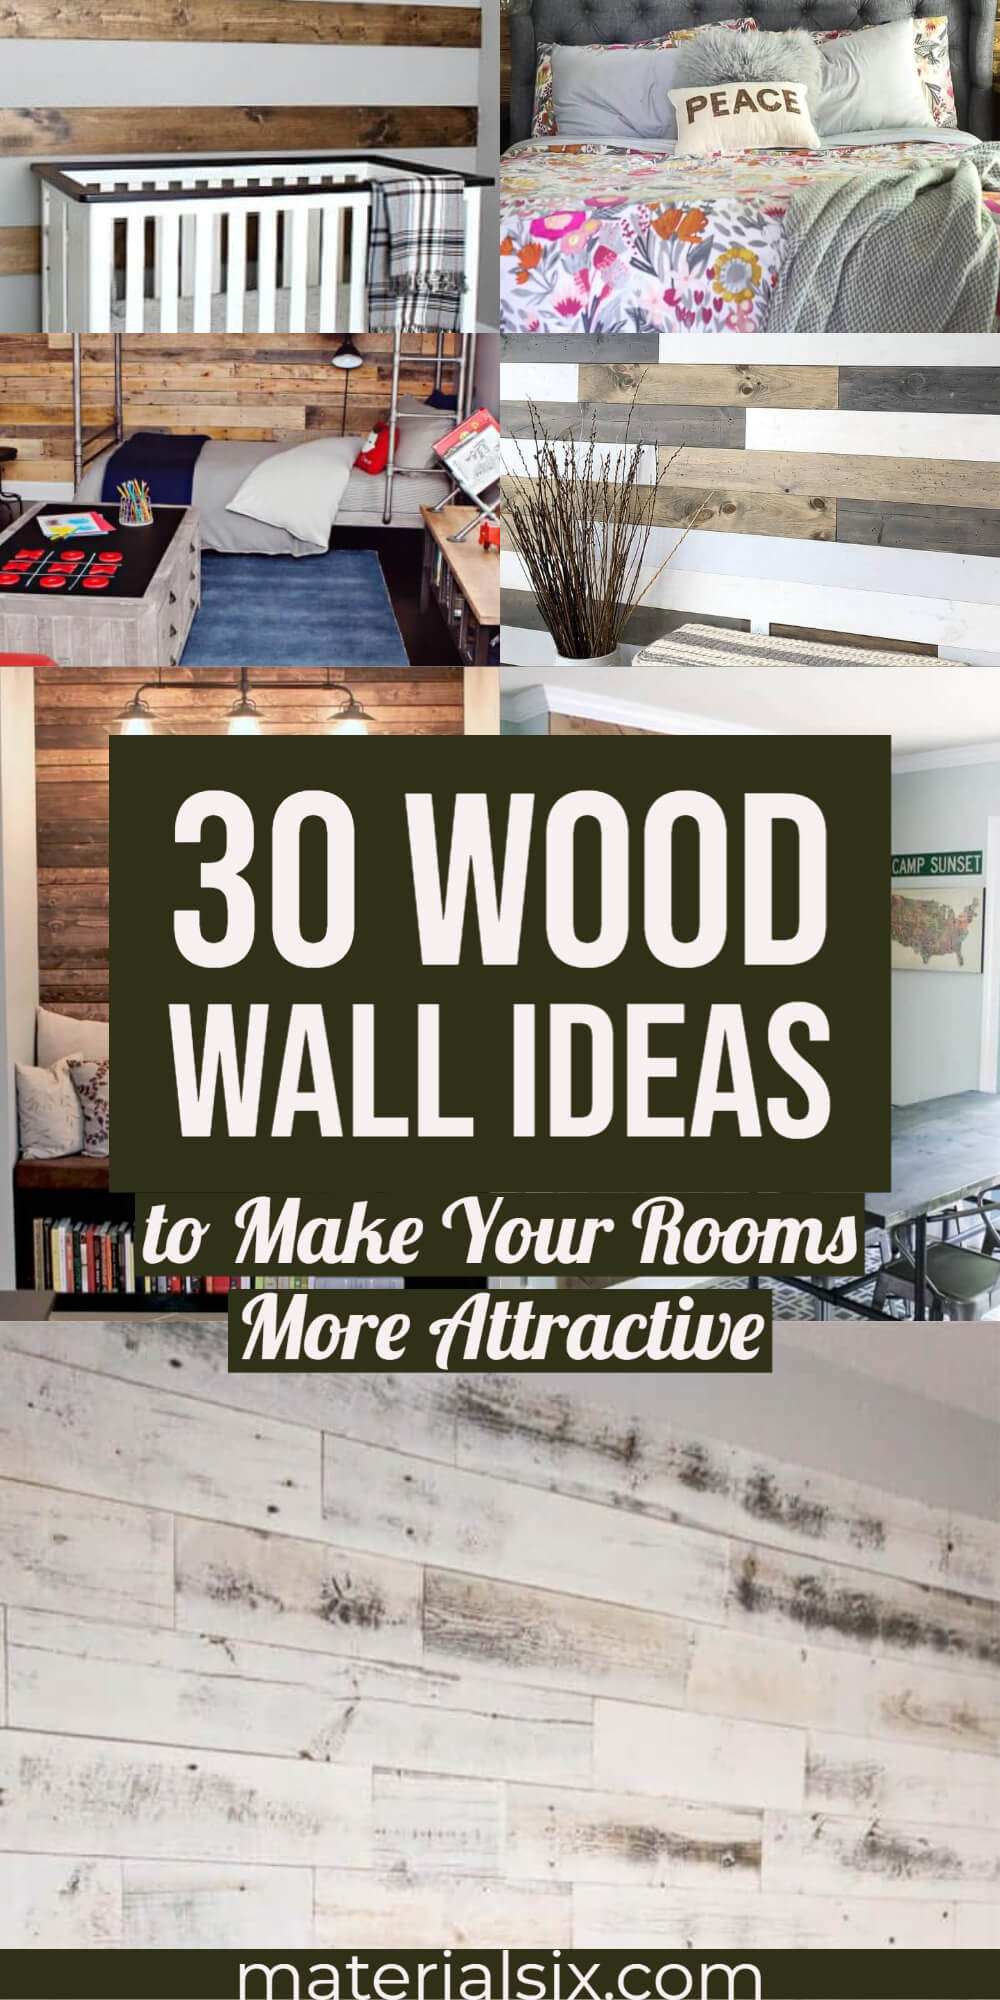 30 Wood Wall Ideas to Make Your Rooms More Attractive